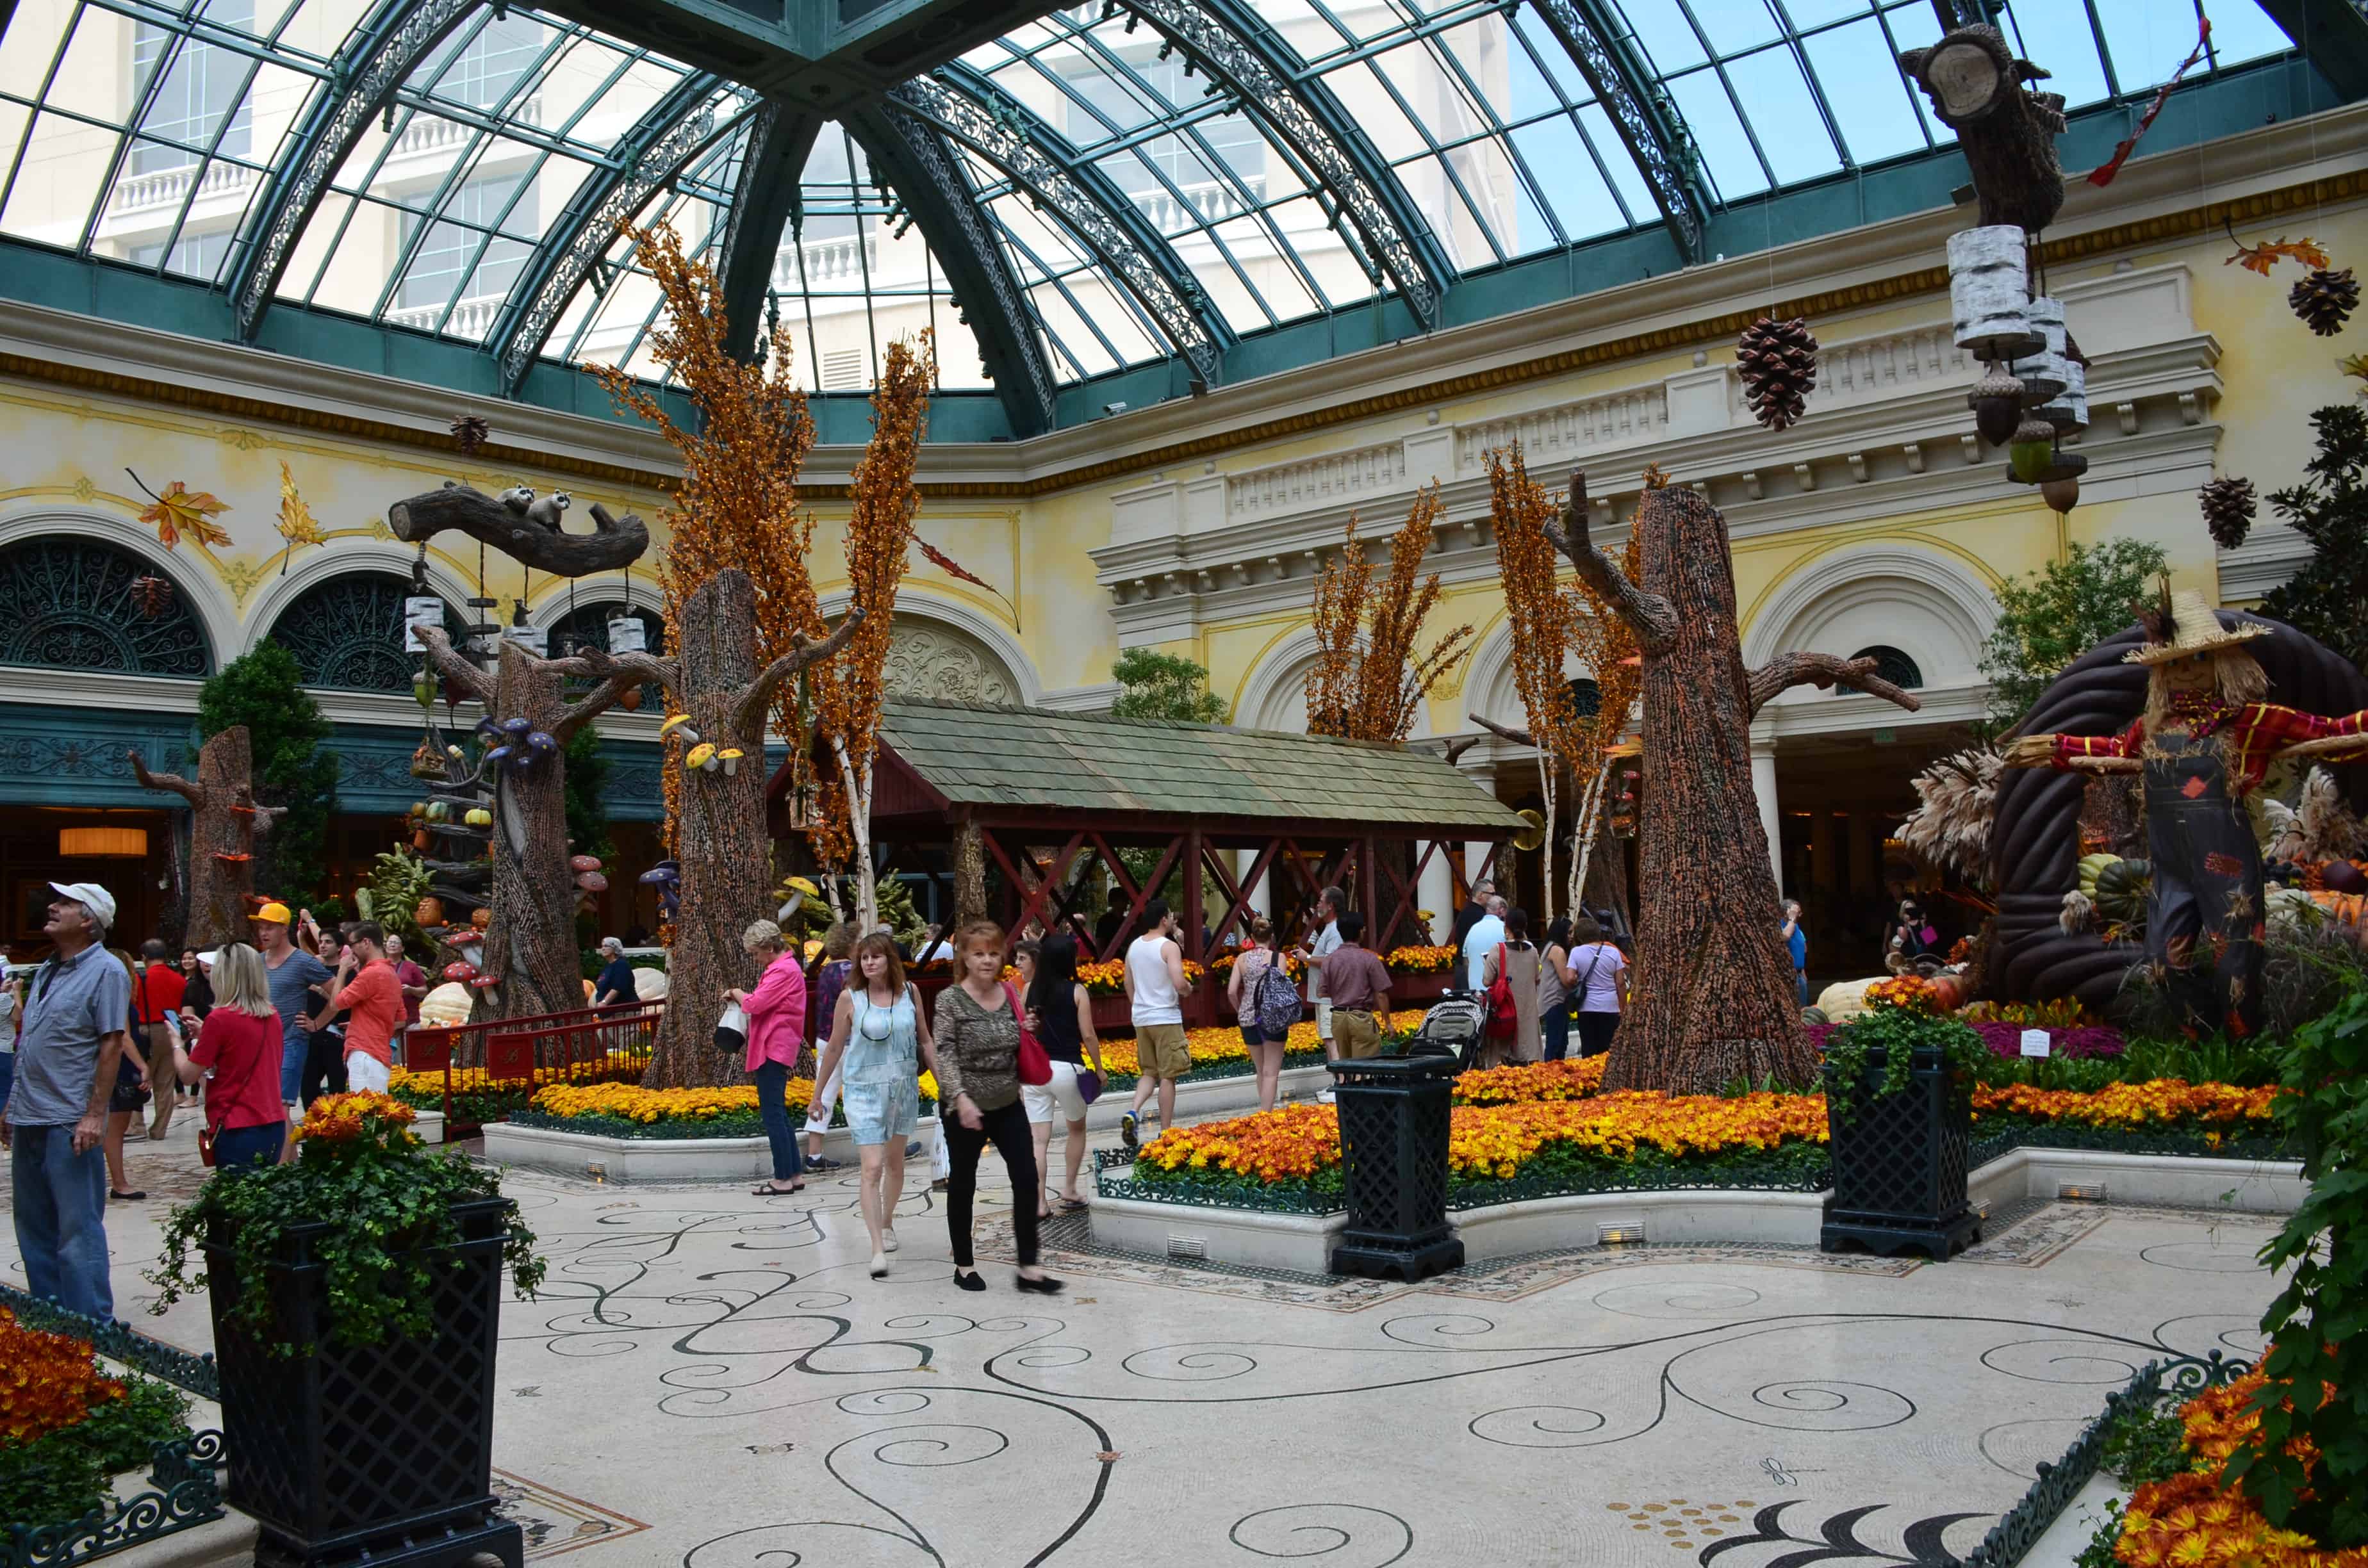 Conservatory and Botanical Gardens at the Bellagio in Las Vegas, Nevada